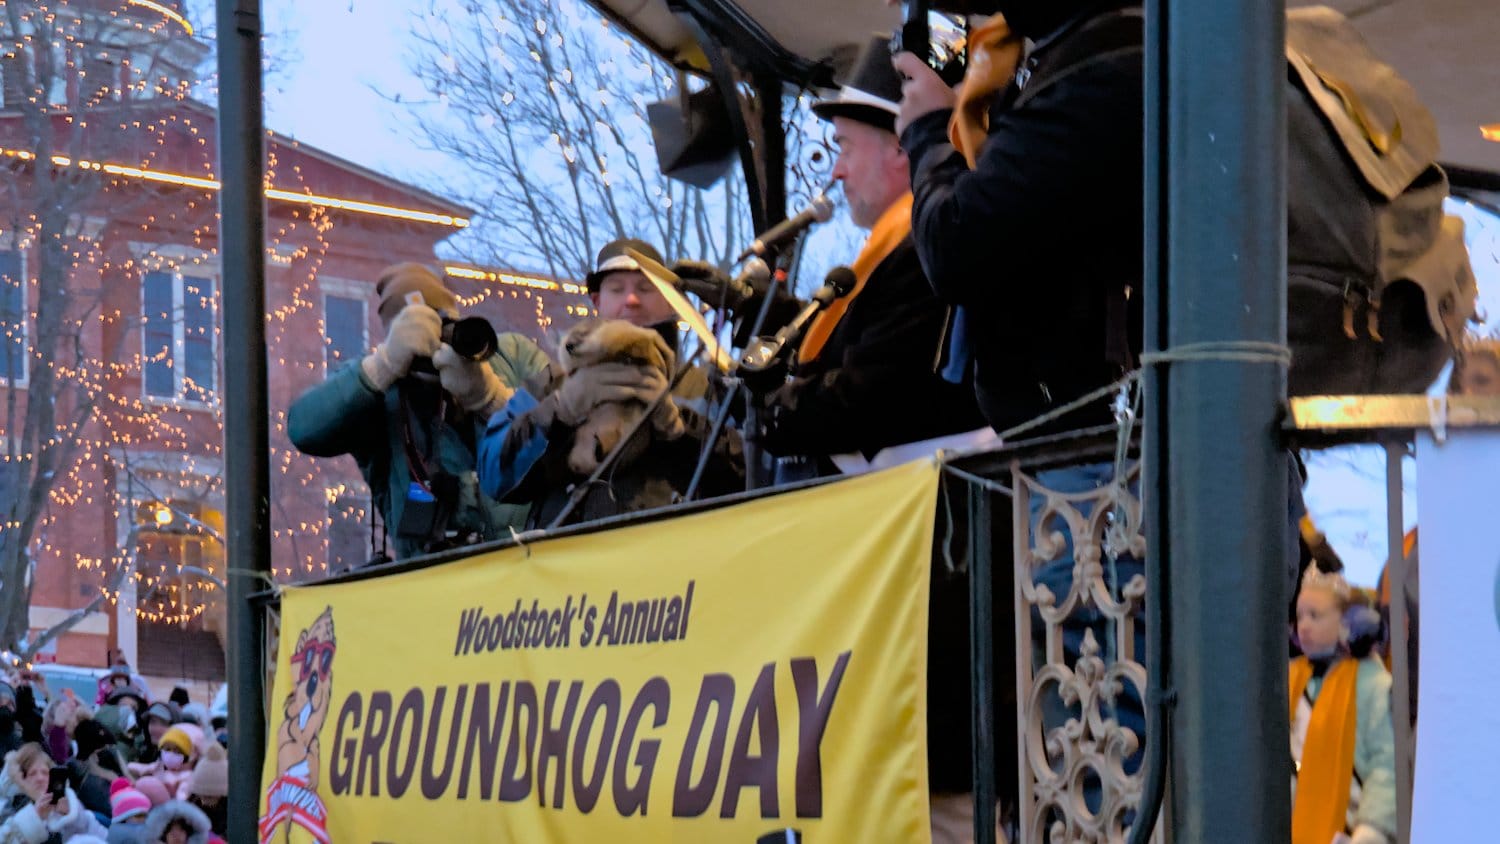 Mayor Mike Turner reads the official groundhog day proclamation to announce Woodstock Willie's prognostication.